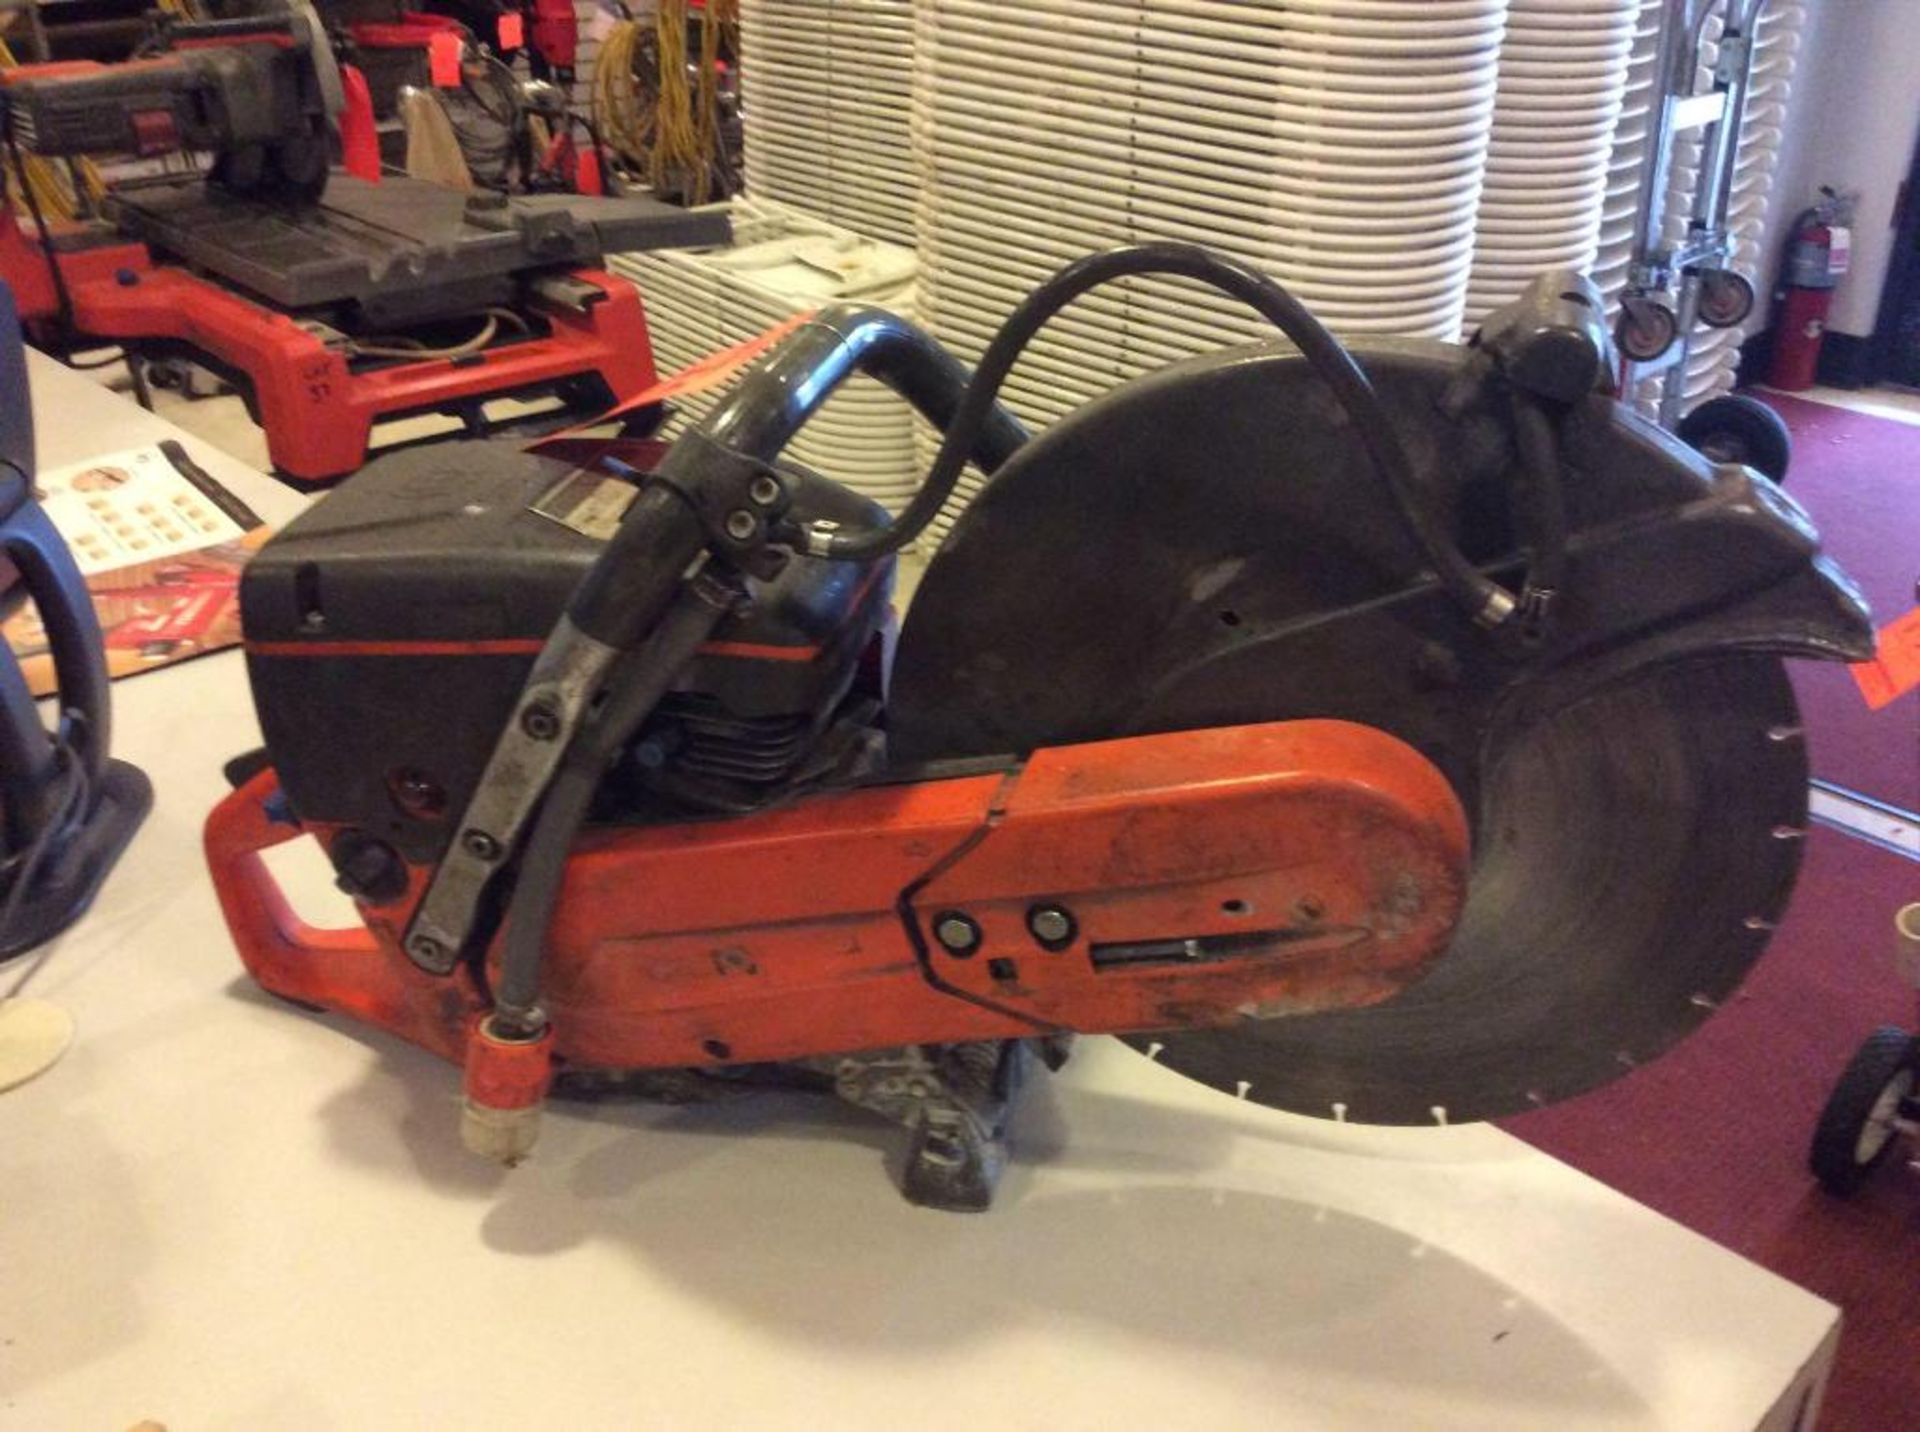 Husqvarna, model K760, gas powered chop saw, 2 cycle, with diamond blade, hard rope pull starter - Image 2 of 2